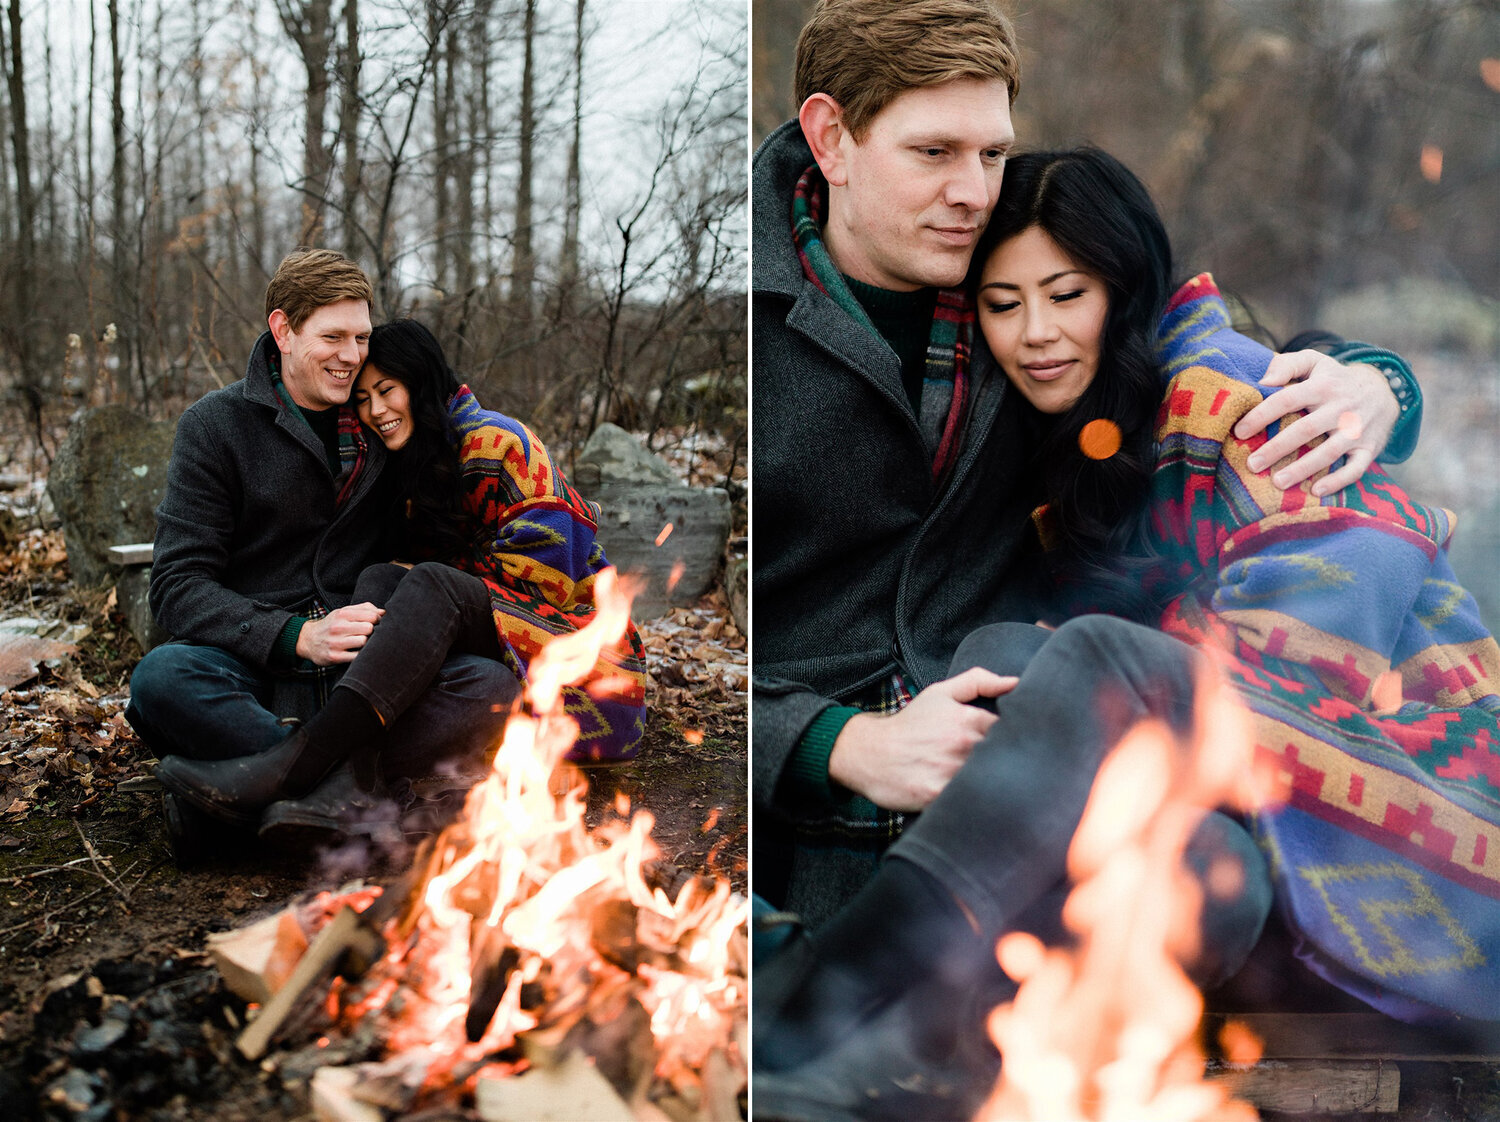 191-Fire-and-ice-winter-engagement-session-in-eugenia.jpg